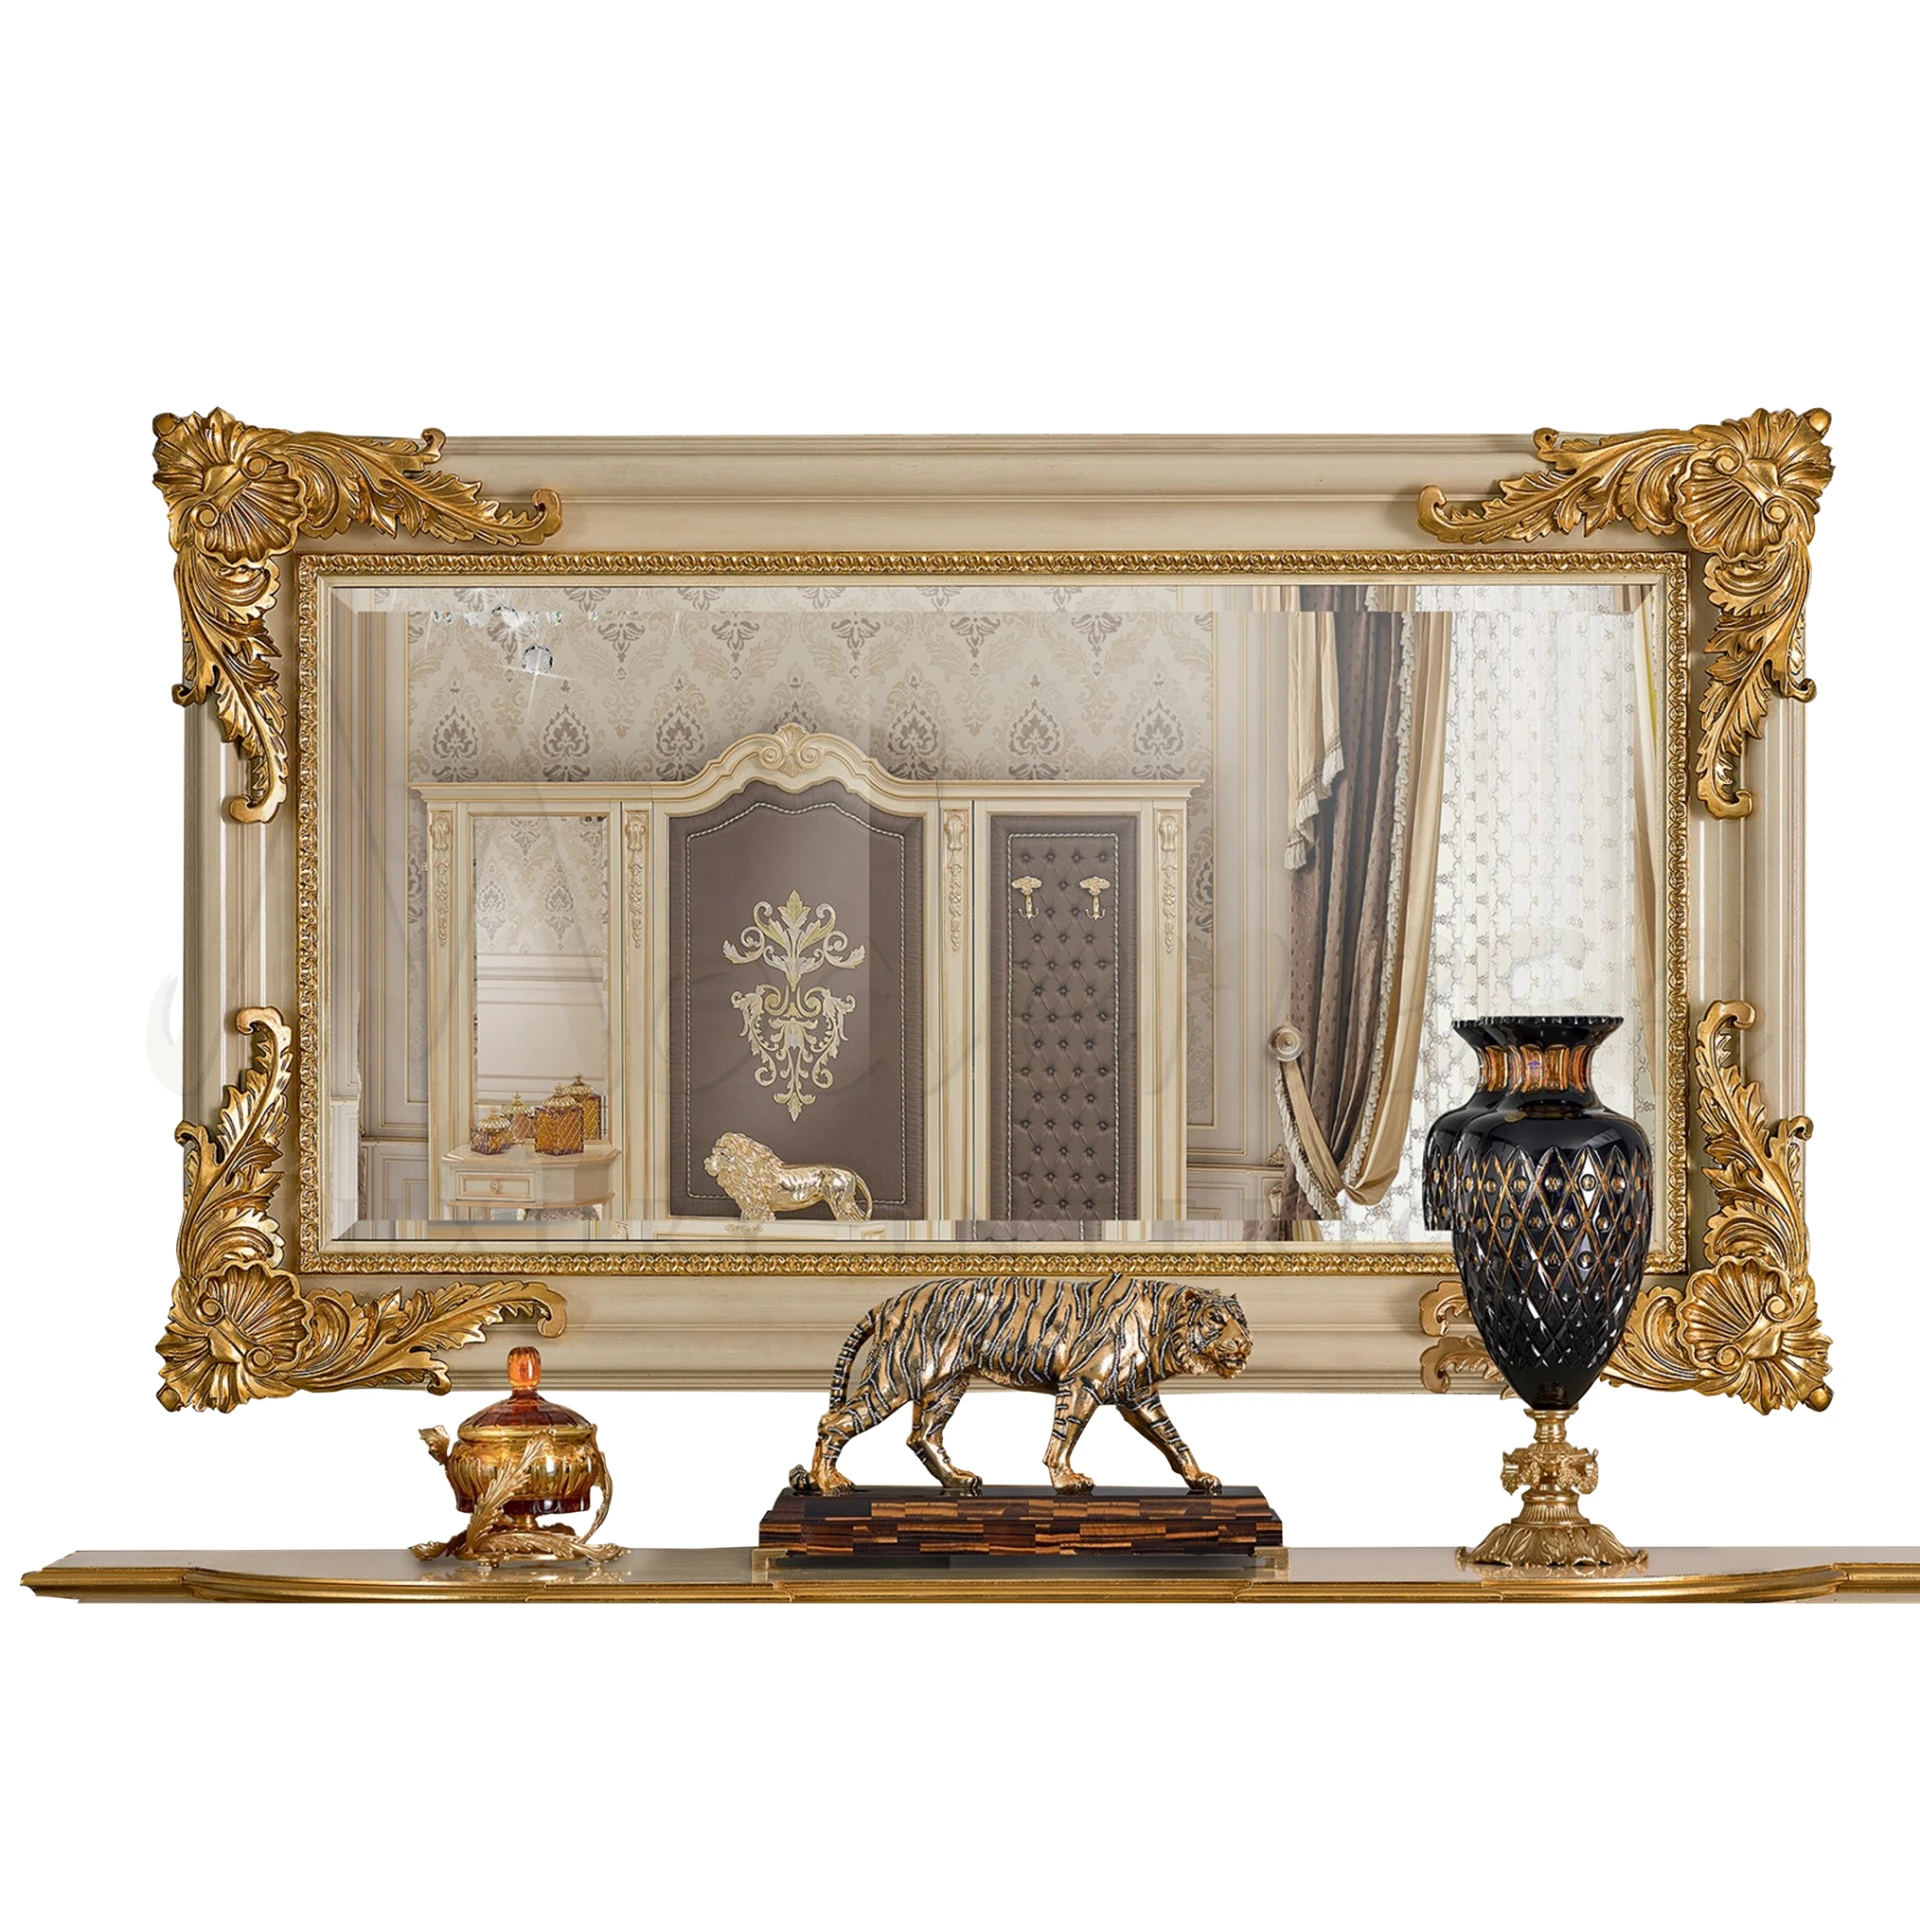 Noble Rectangular Mirror, crafted with modern technology and Italian care, perfect for enhancing luxury in home decor.